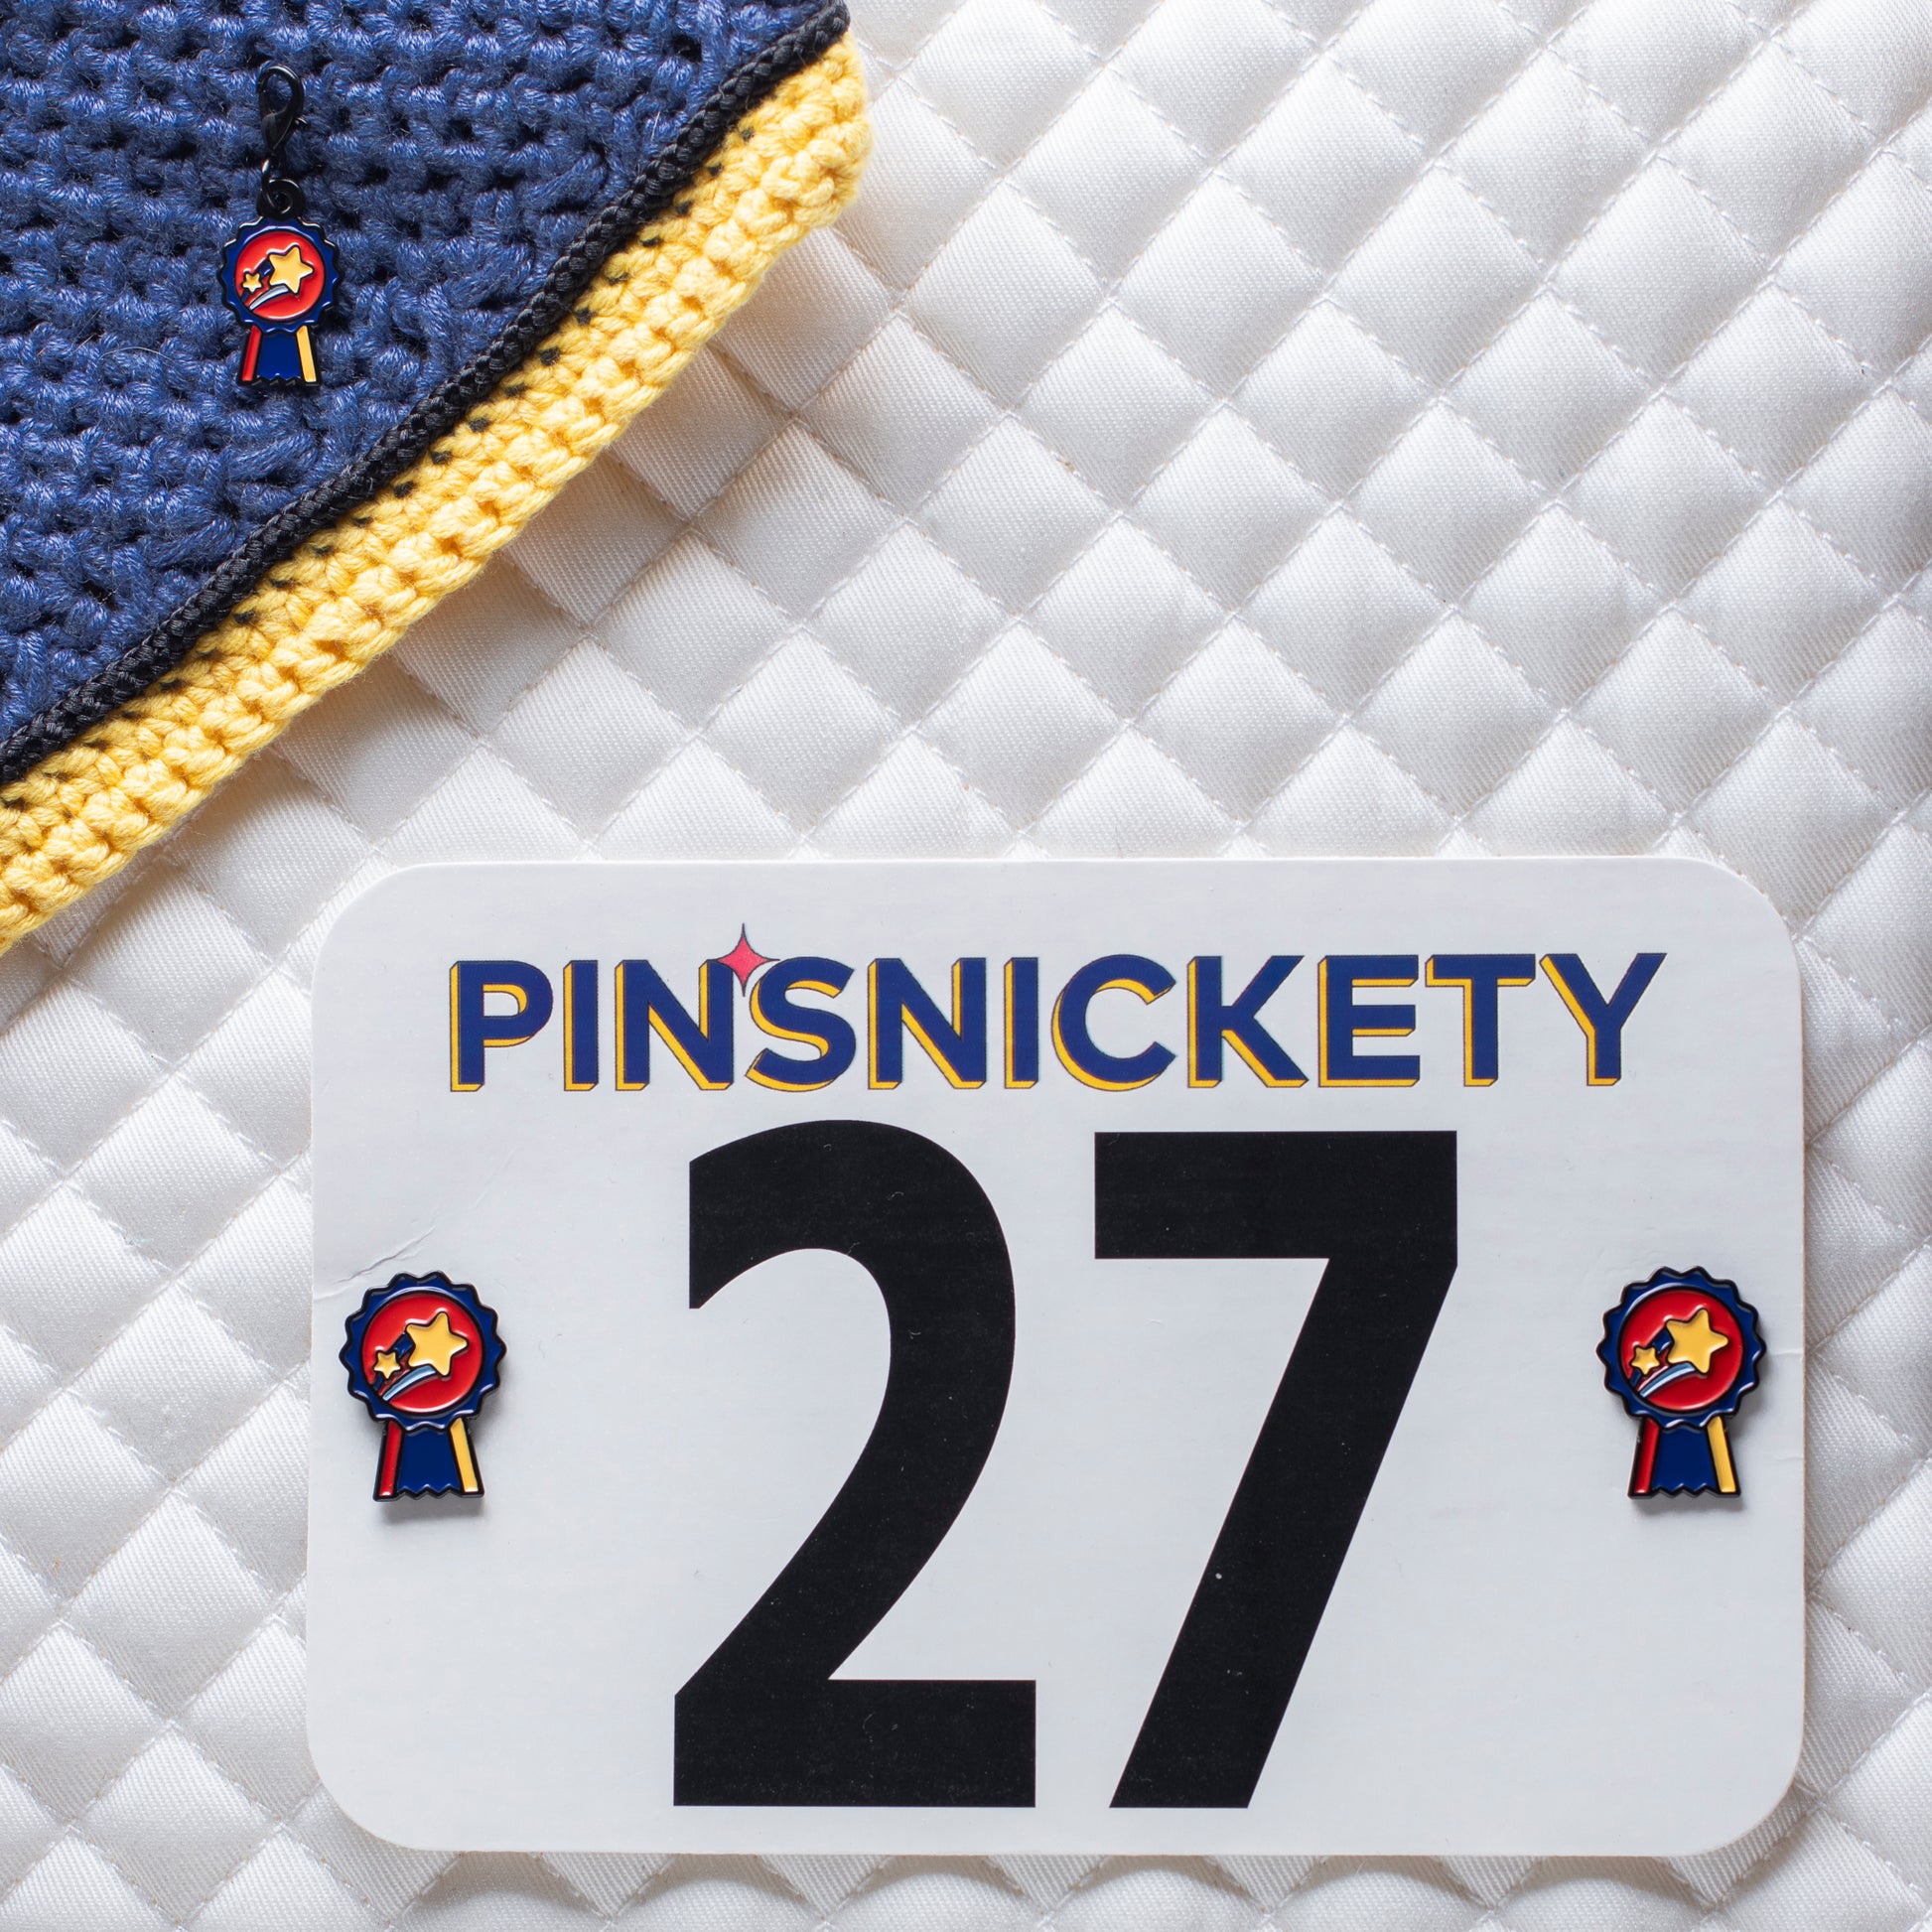 pinsnickety champion braid and bridle charm on a bonnet and champion horse show number pins on a saddle pad